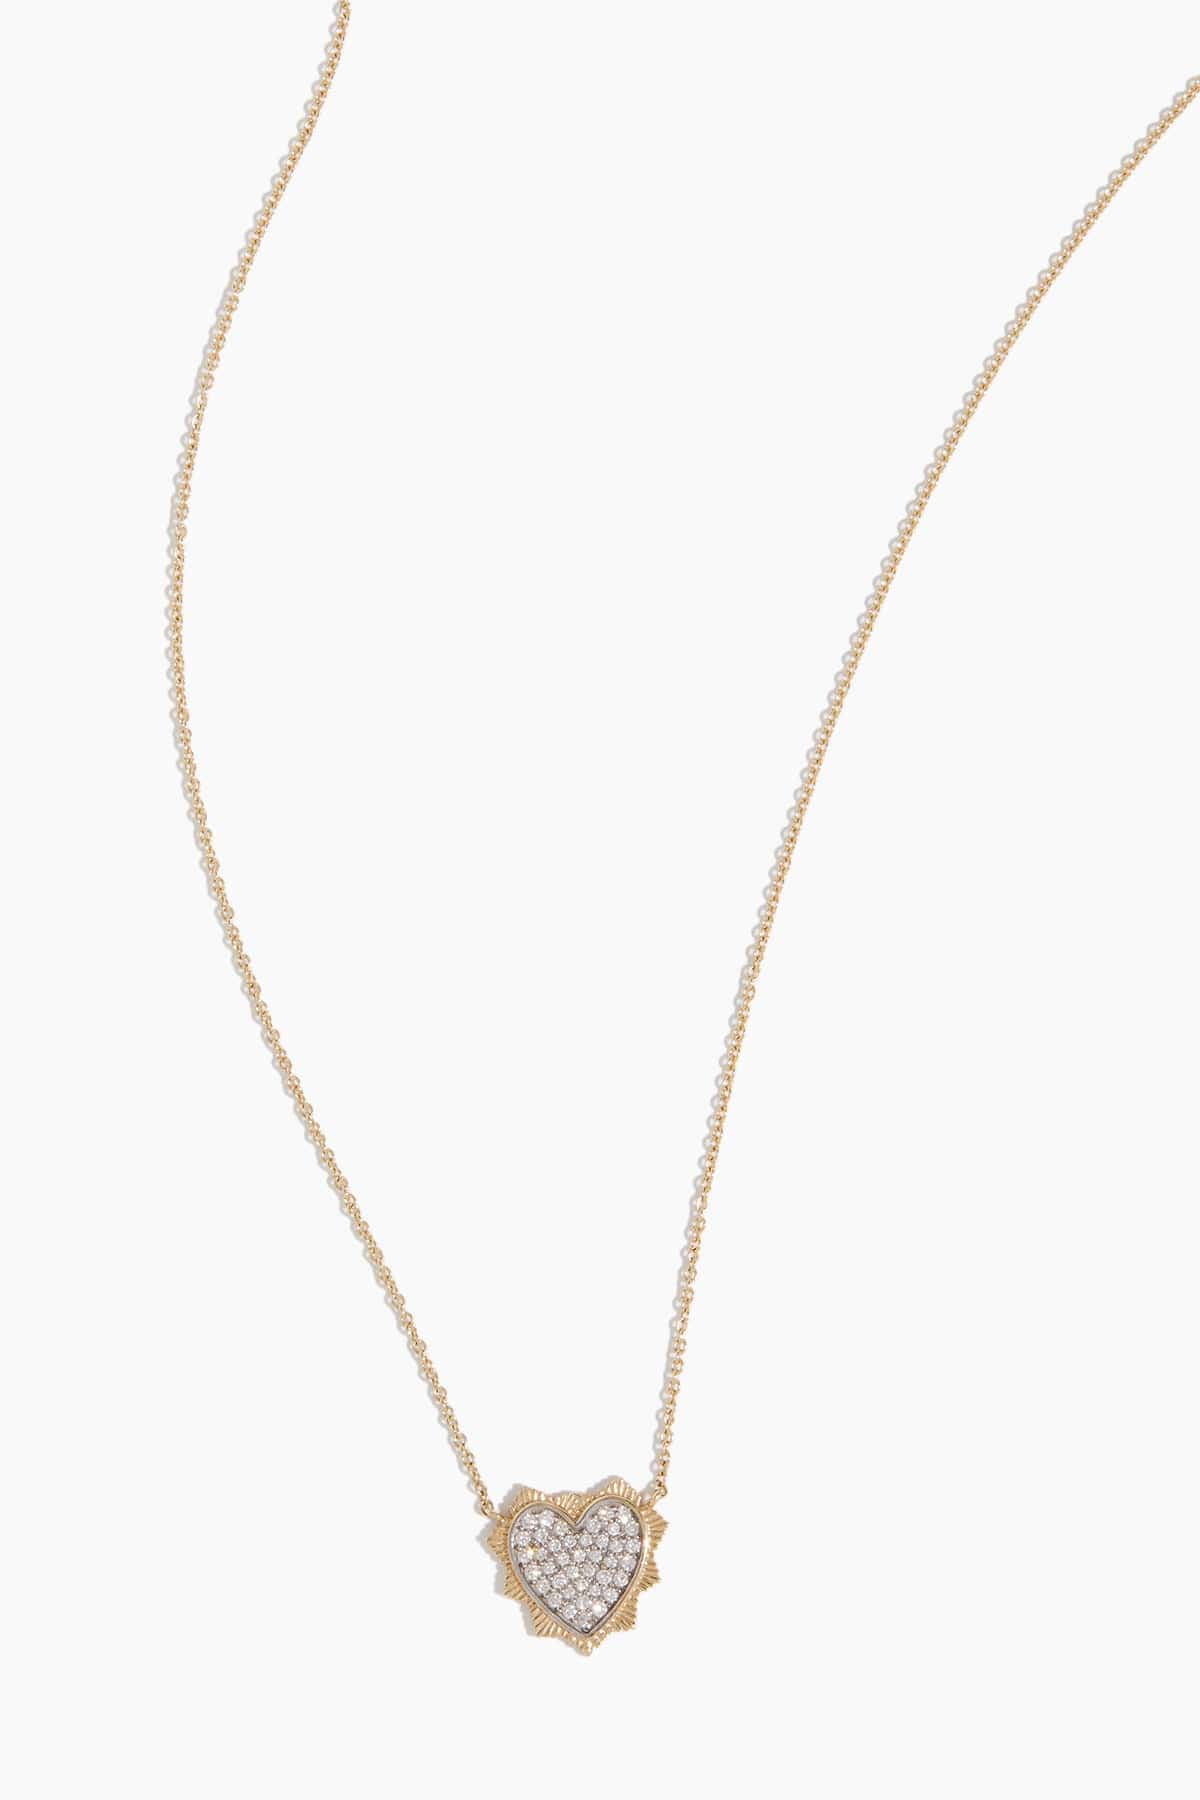 Vintage La Rose Pave Spike Heart Necklace in 14k Yellow Gold/Sterling Silver - Size: One size